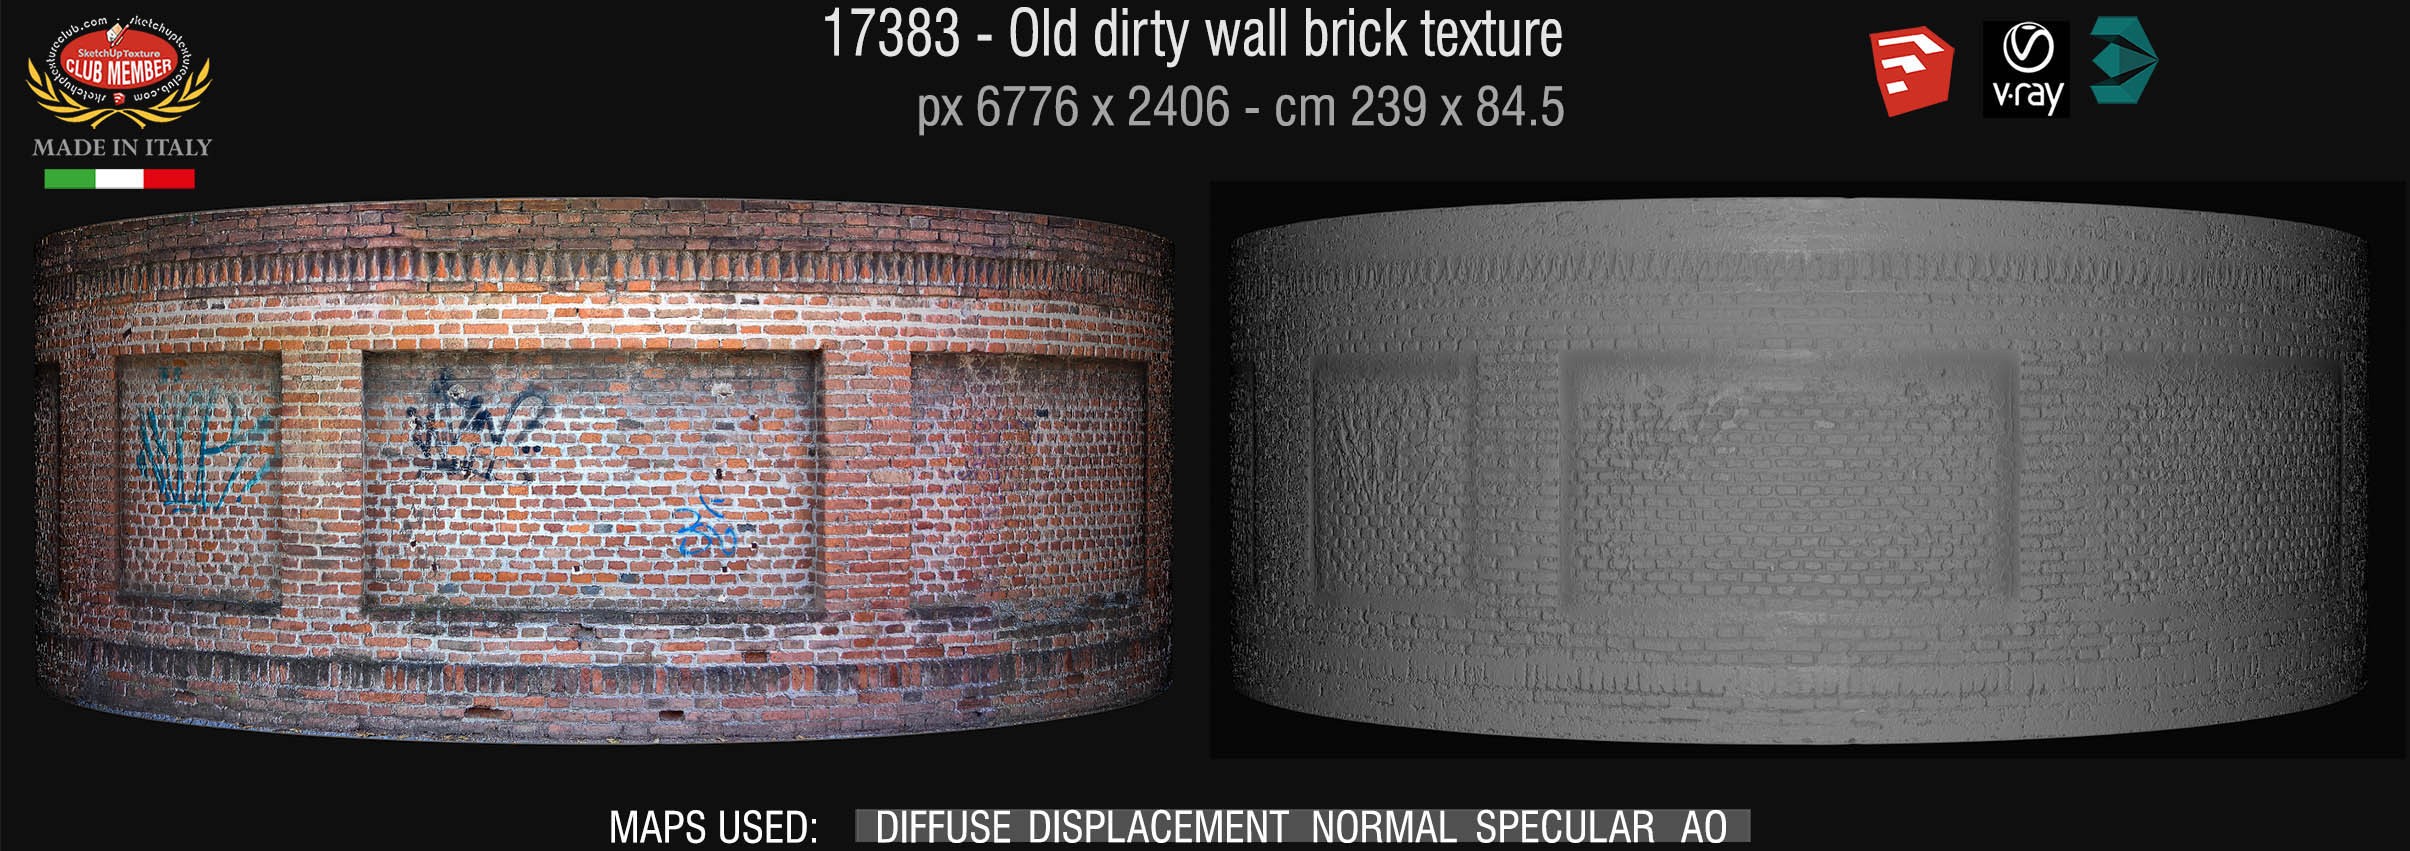 32_old dirty wall brick texture + maps DEMO